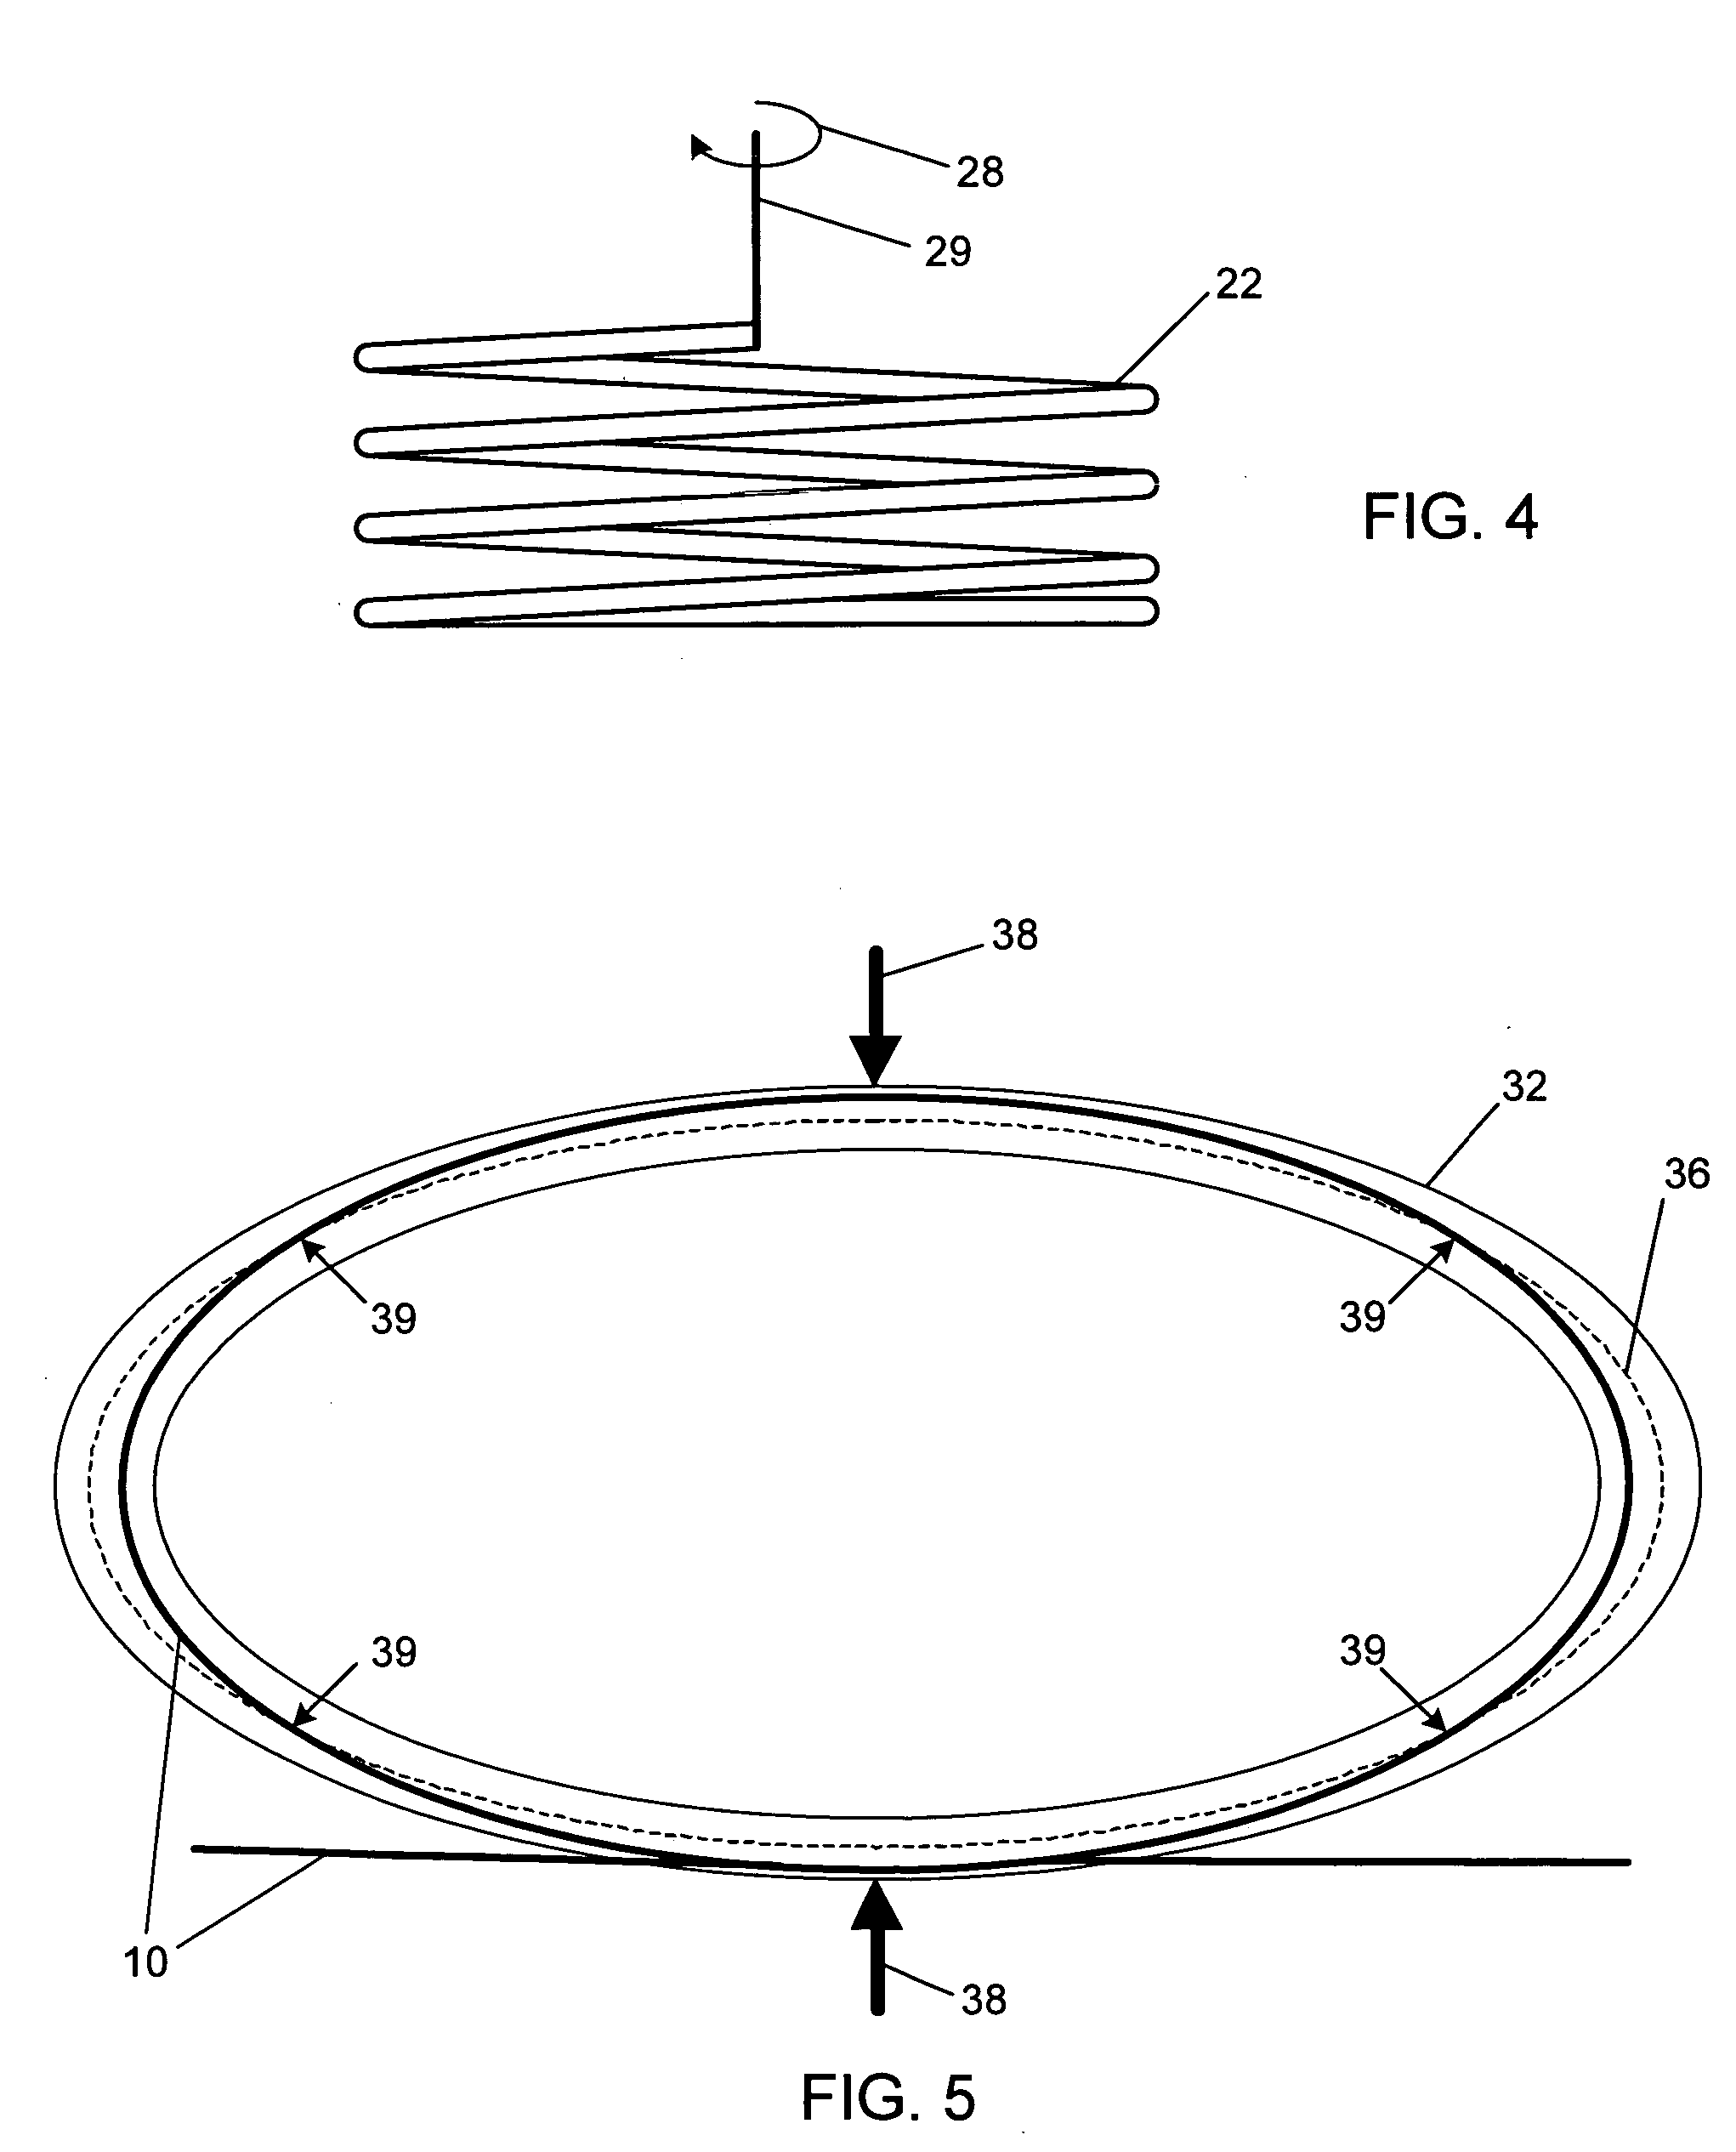 Apparatus and method for suppression of stimulated brillouin scattering in an optical fiber